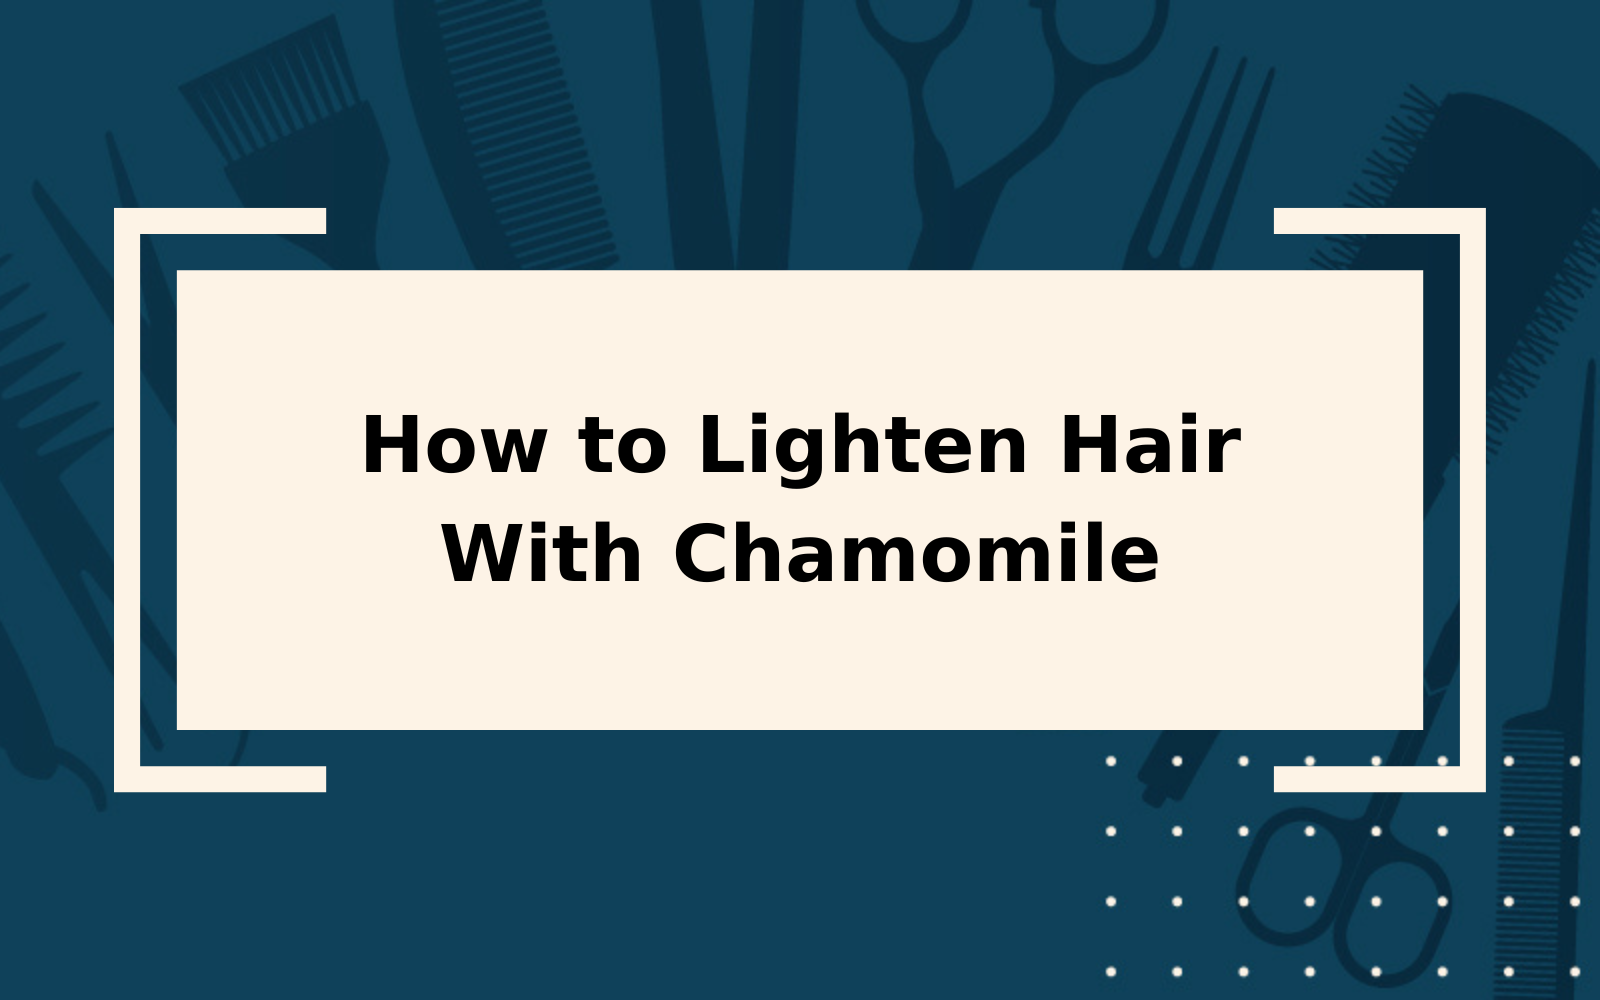 Chamomile Hair Lightening | Step-by-Step Guide